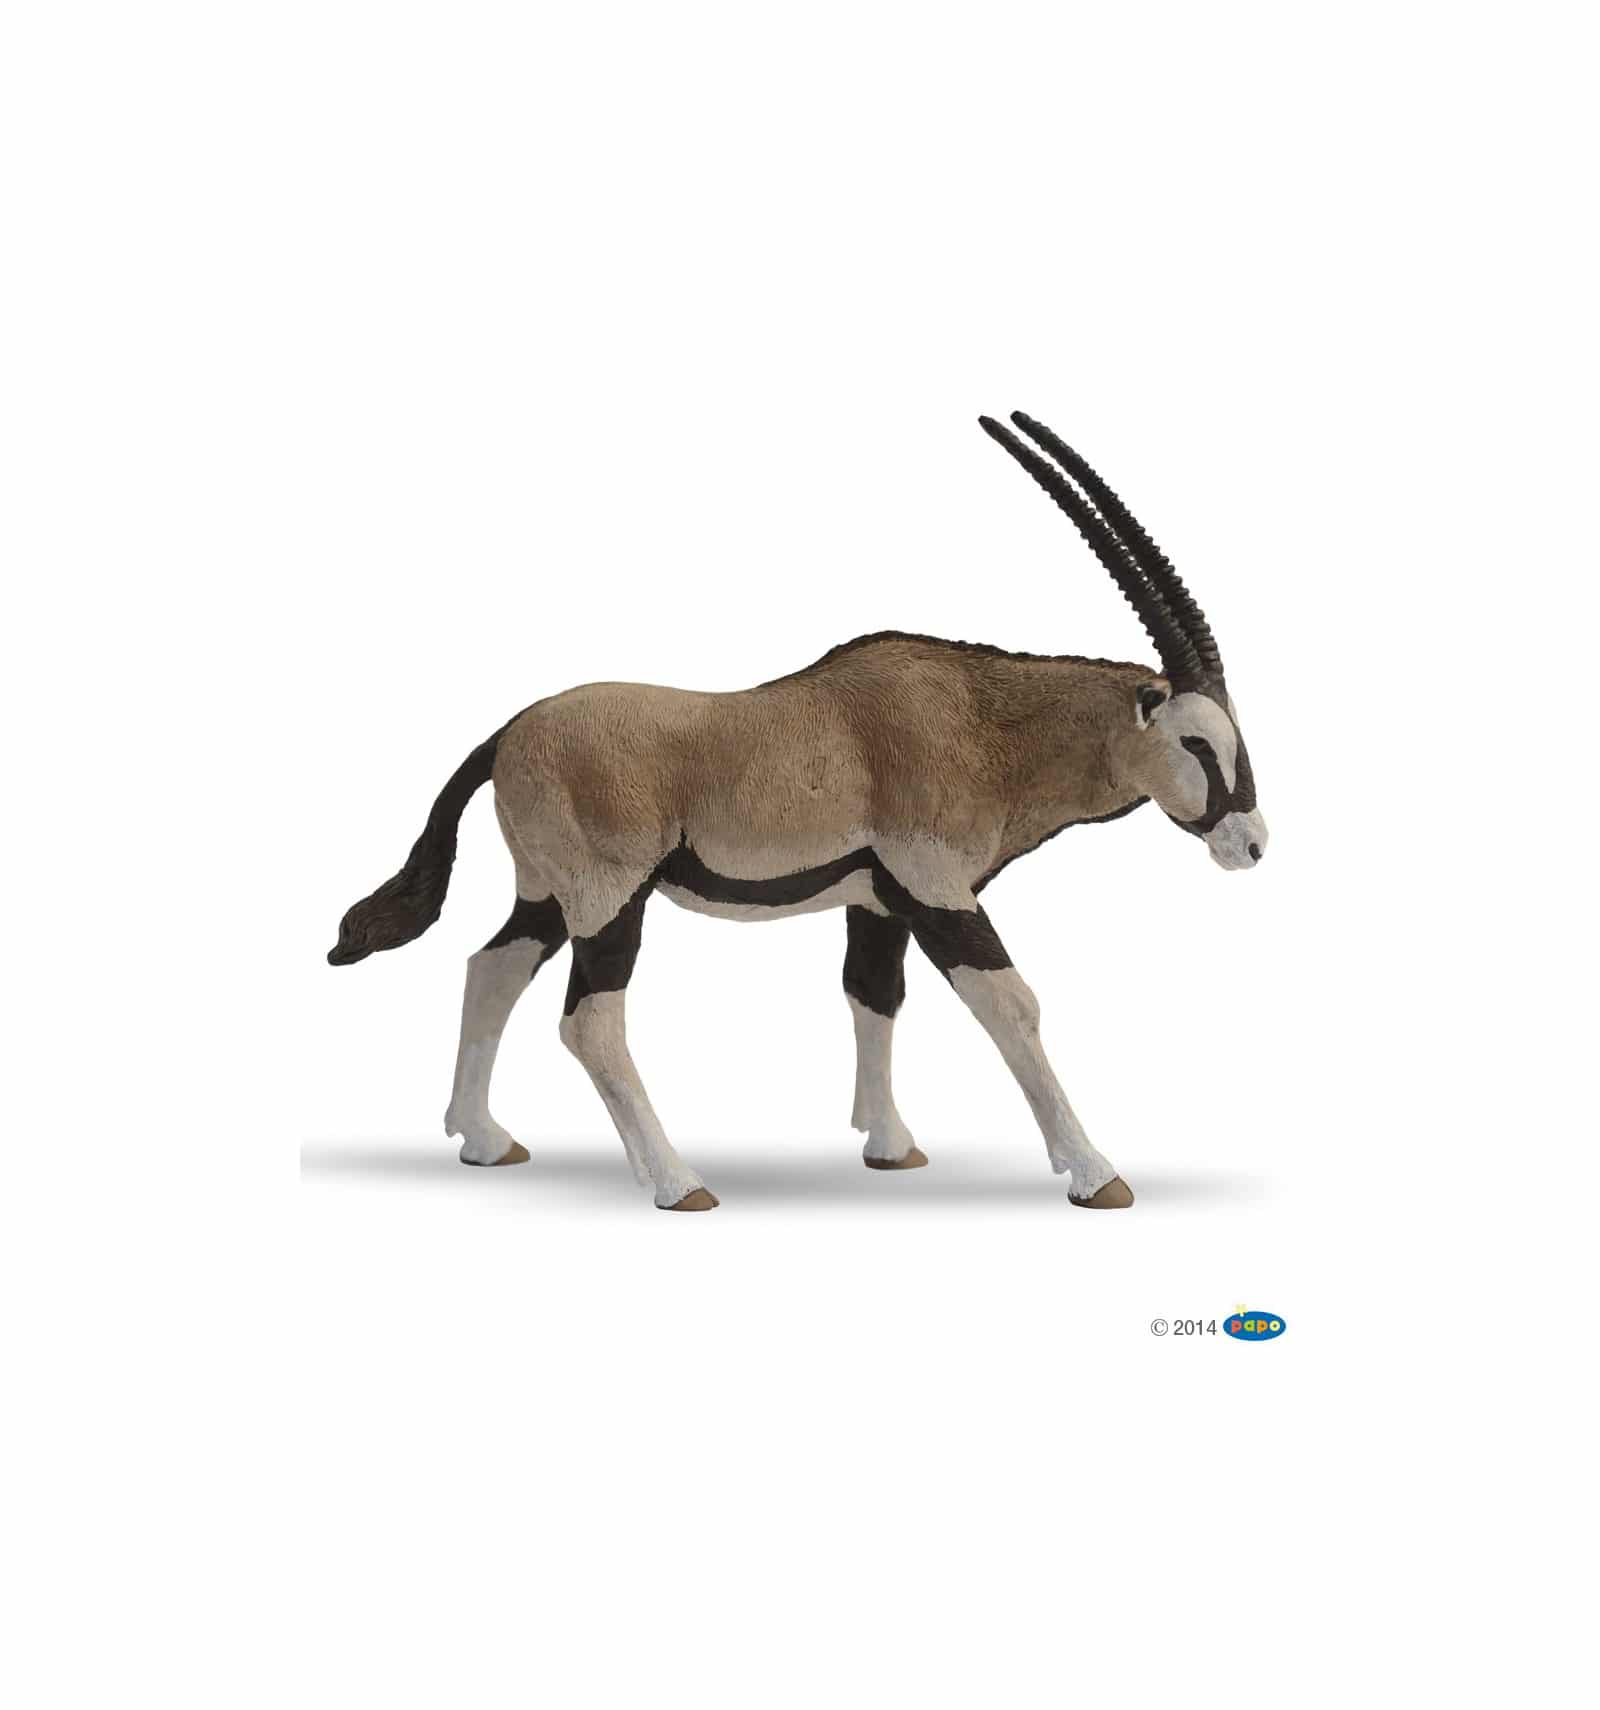 Oryx Antelope Figure - A2Z Science & Learning Toy Store